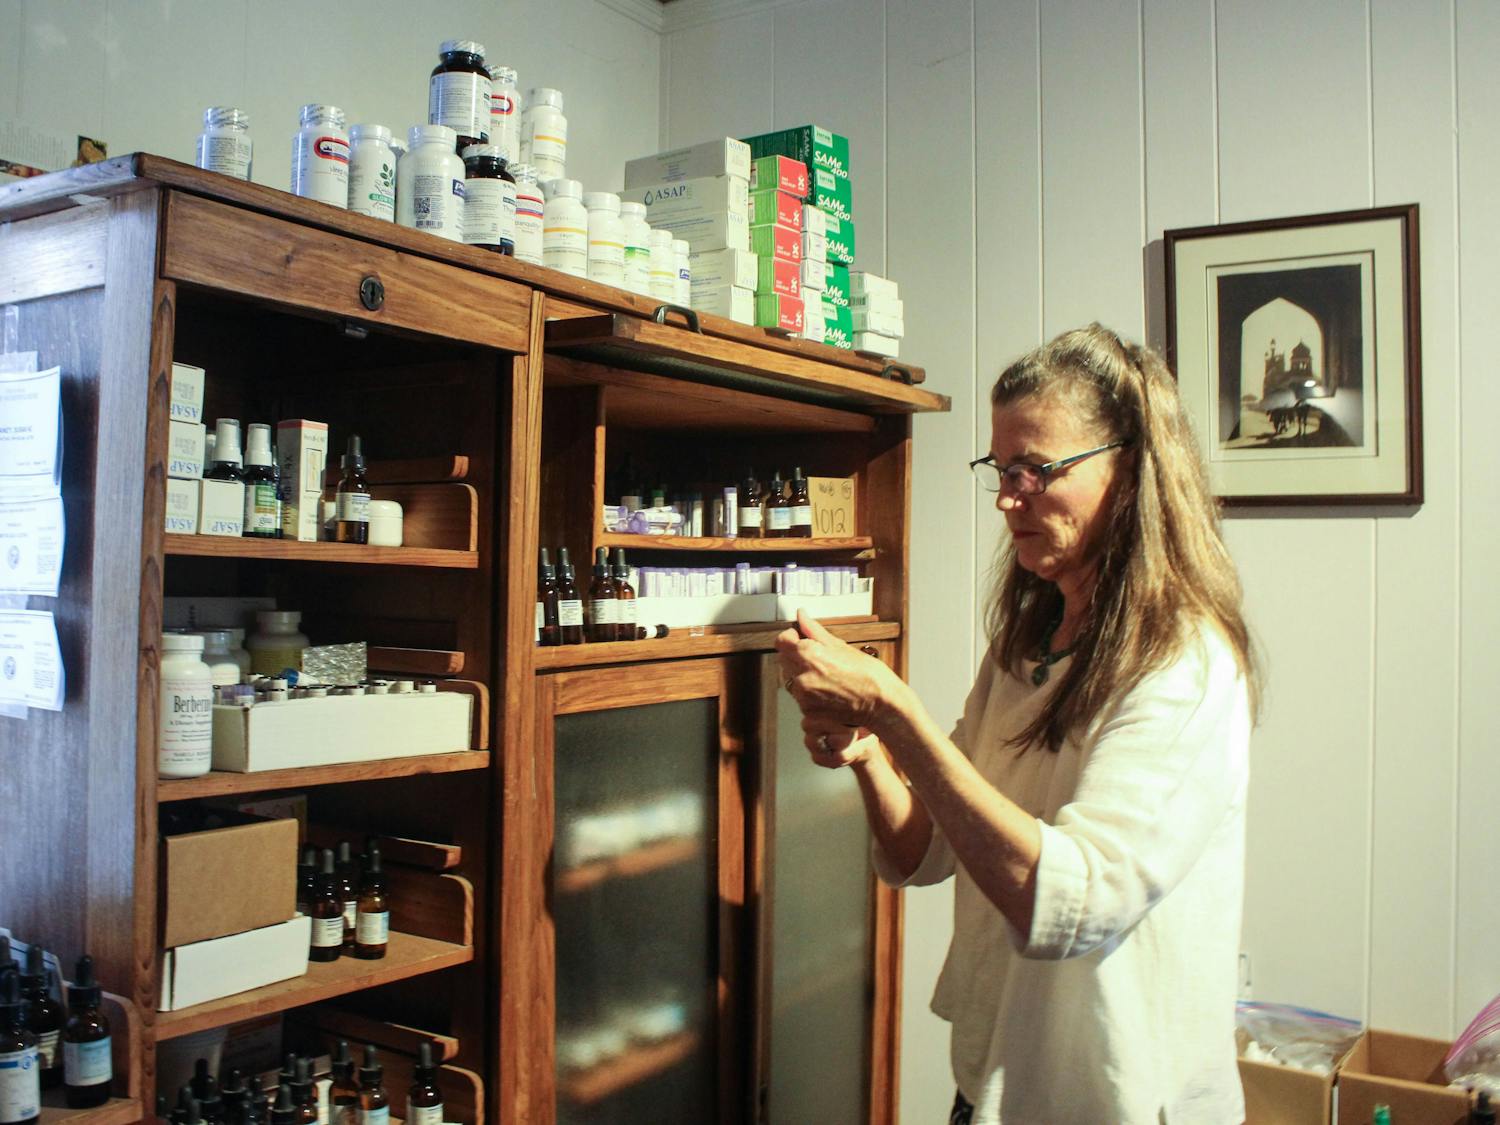 Dr. Susan DeLaney, 66, of Chapel Hill, working in her office on Saturday, Oct. 5, 2019 at The Wellness Alliance in Carrboro. DeLaney is a naturopathic general practitioner and uses natural medicines to treat various ailments.